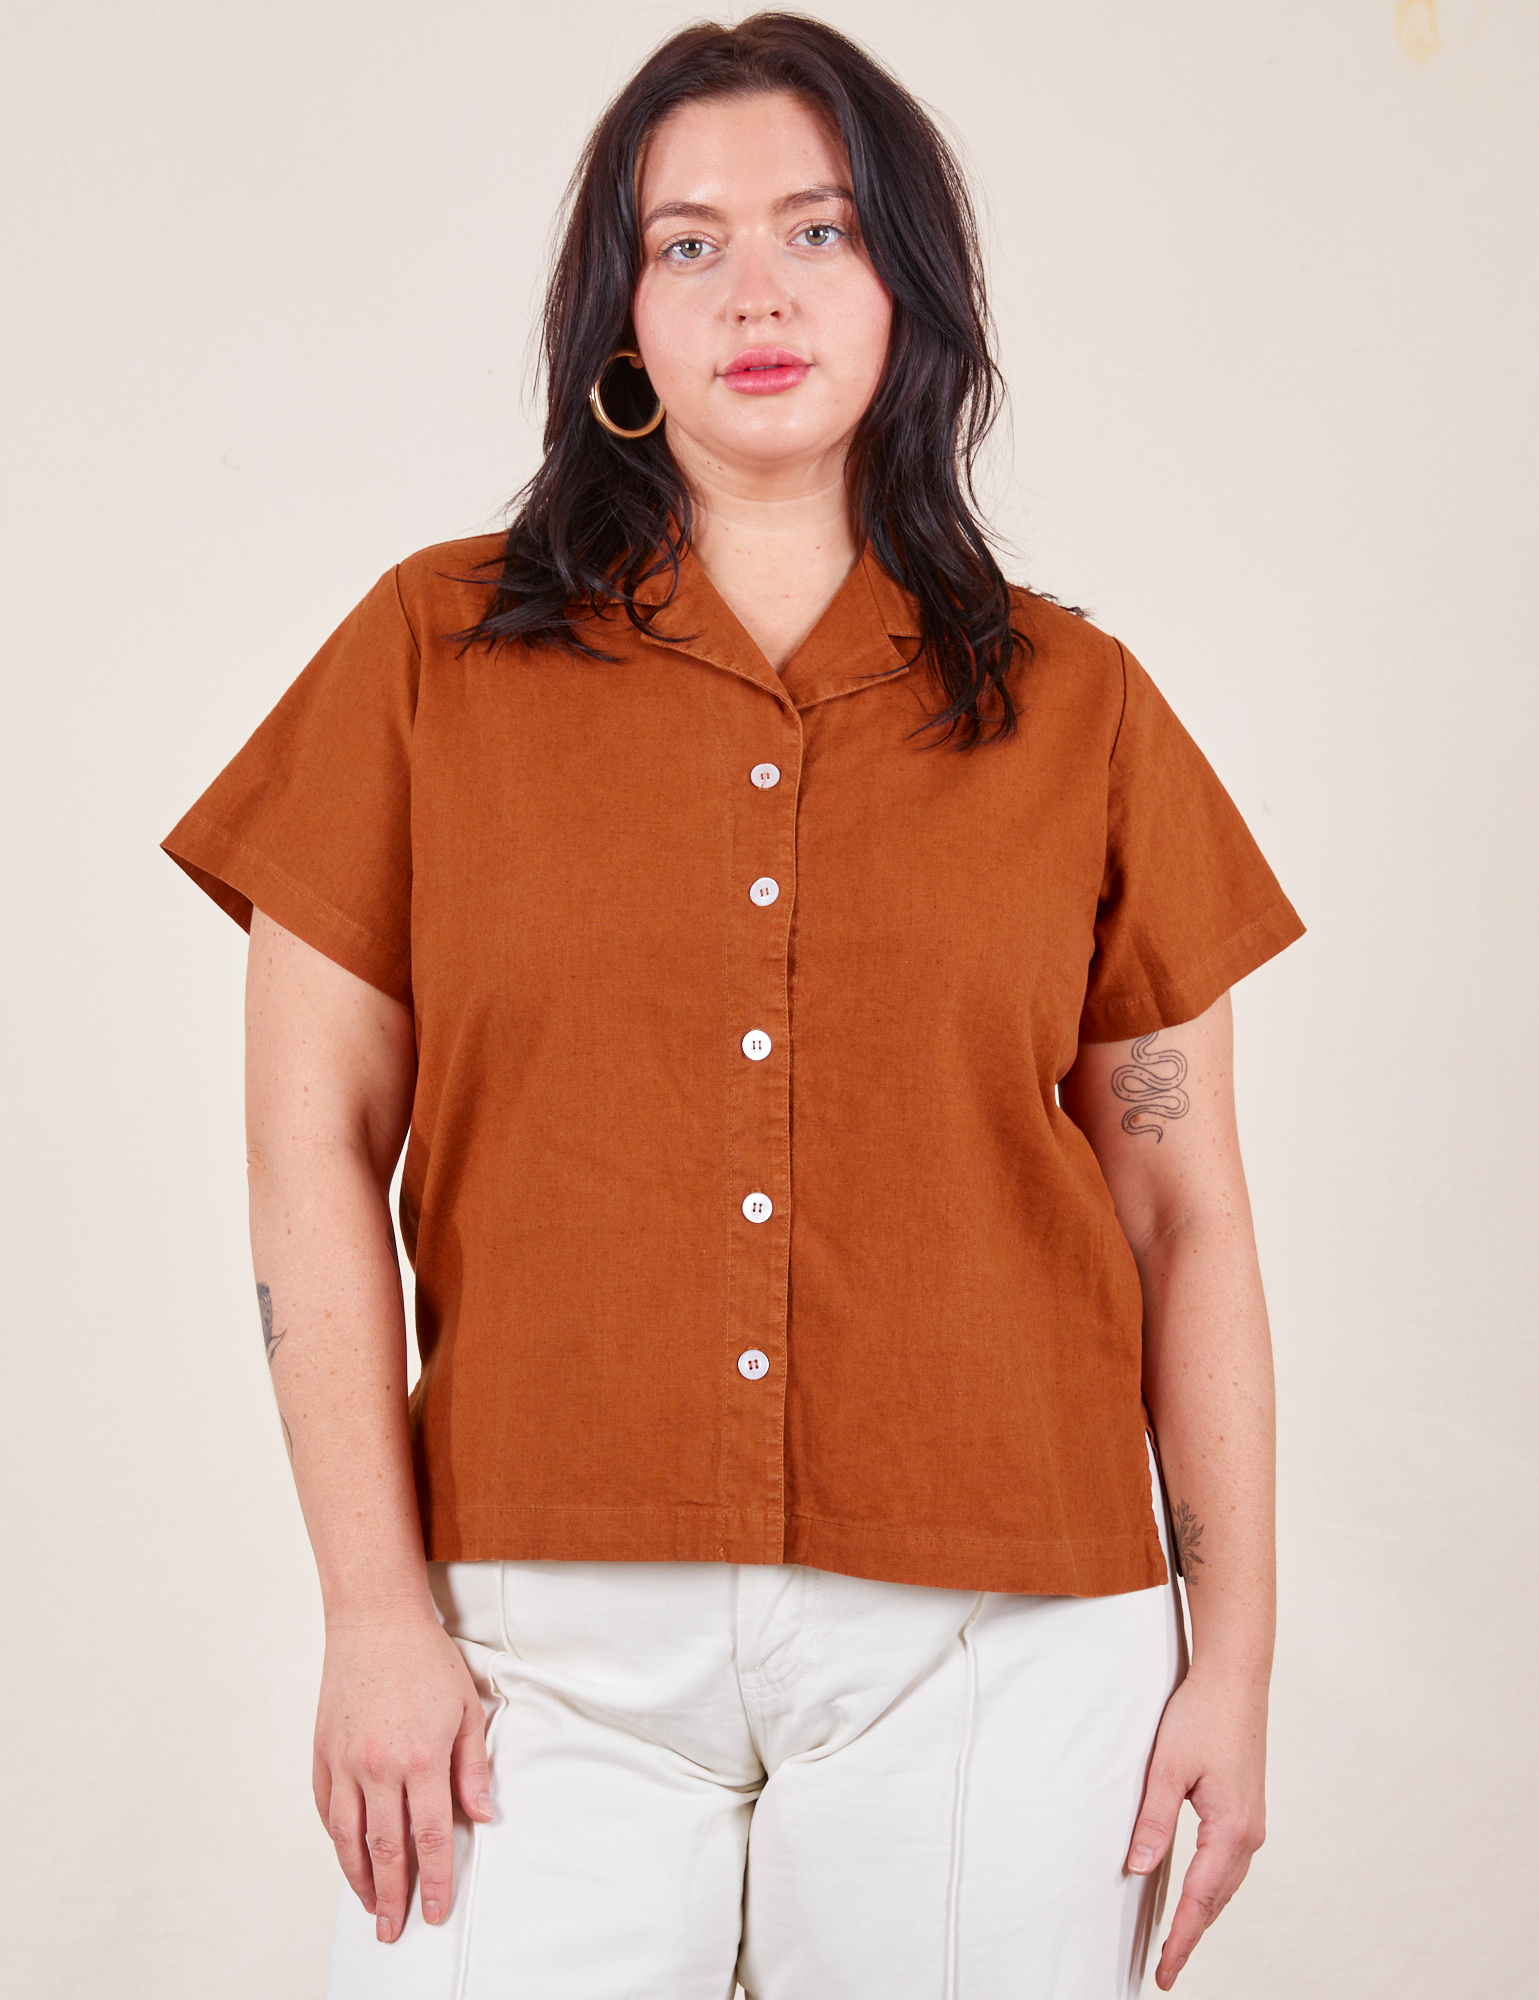 Faye is wearing Pantry Button-Up in Burnt Terracotta